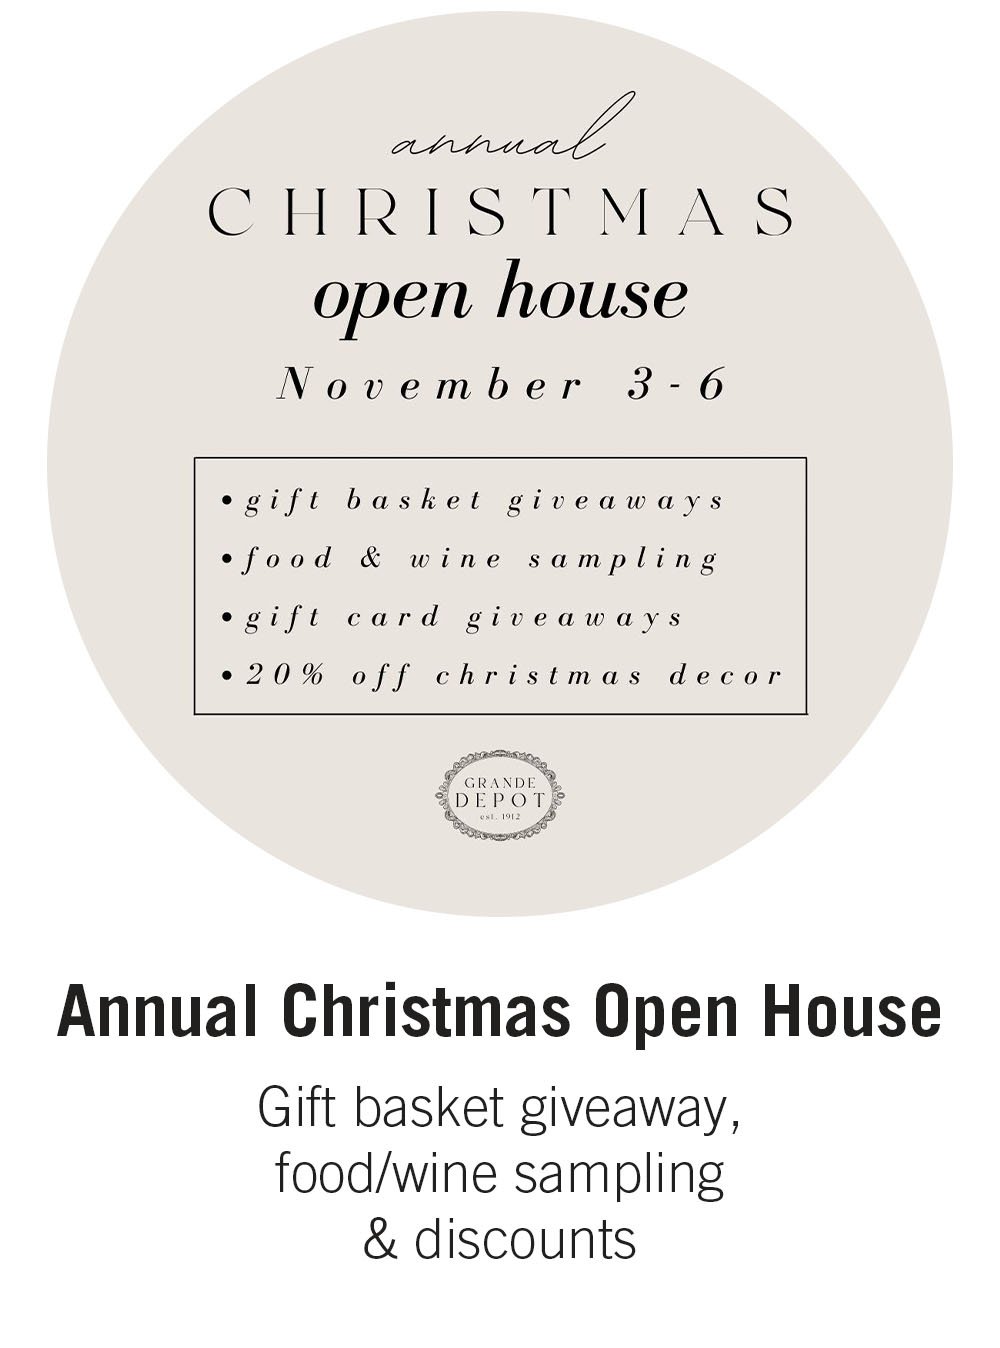 Annual Christmas Open House Gift basket giveaway, food/wine sampling & discounts 